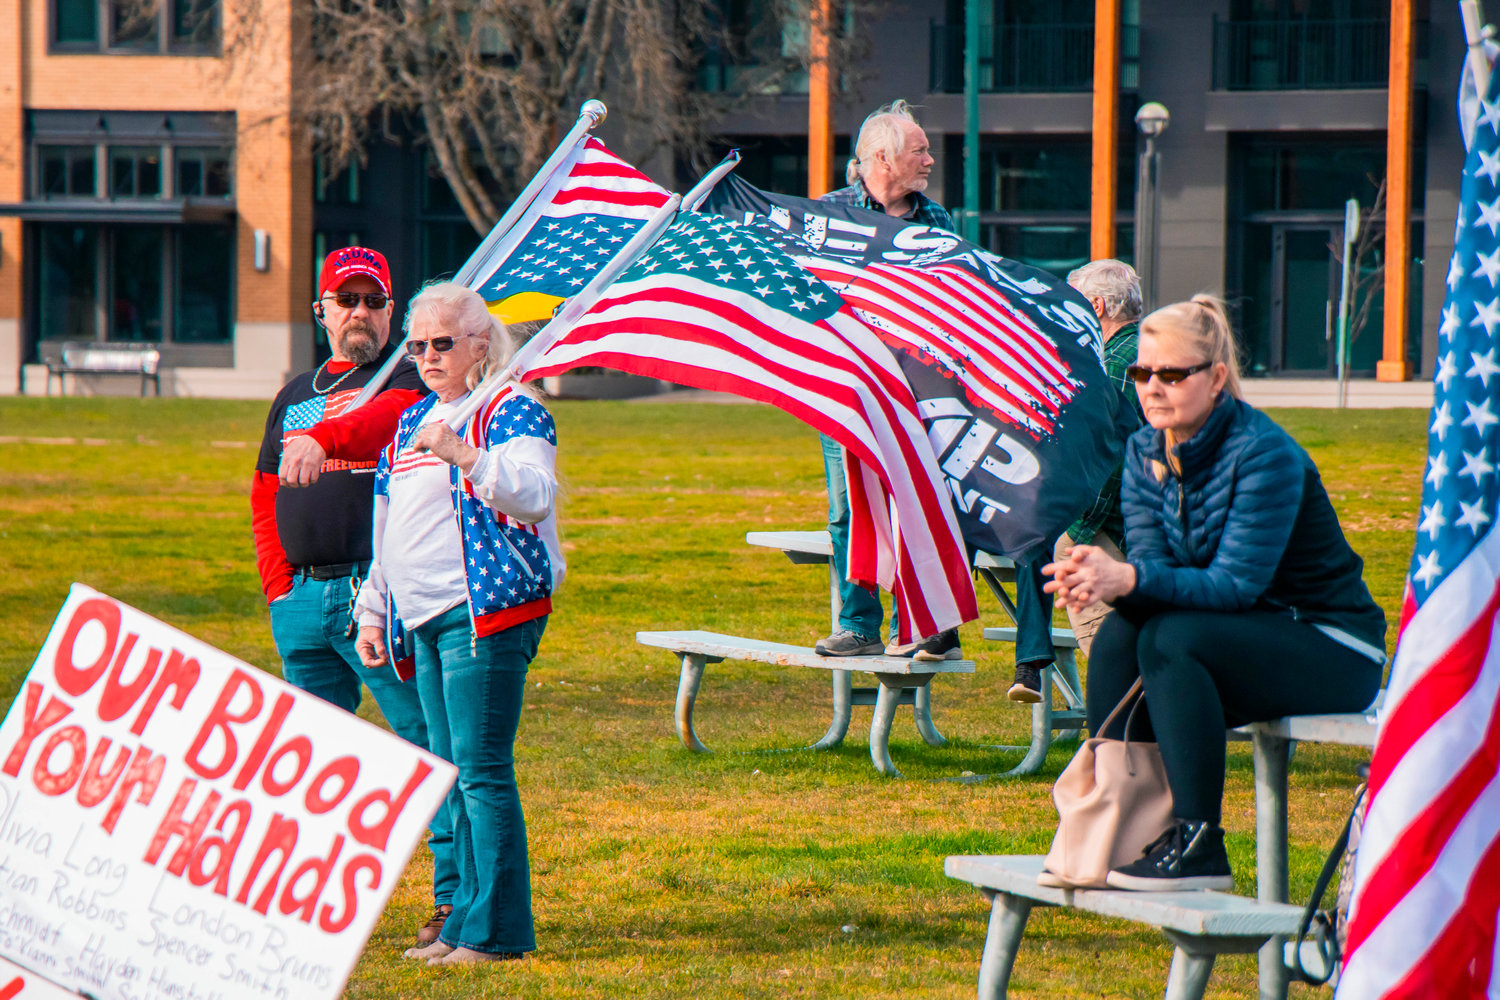 Flags are waved by attendees of a rally in support of reopening schools to full in-person learning near Capitol Lake in Olympia on Saturday.